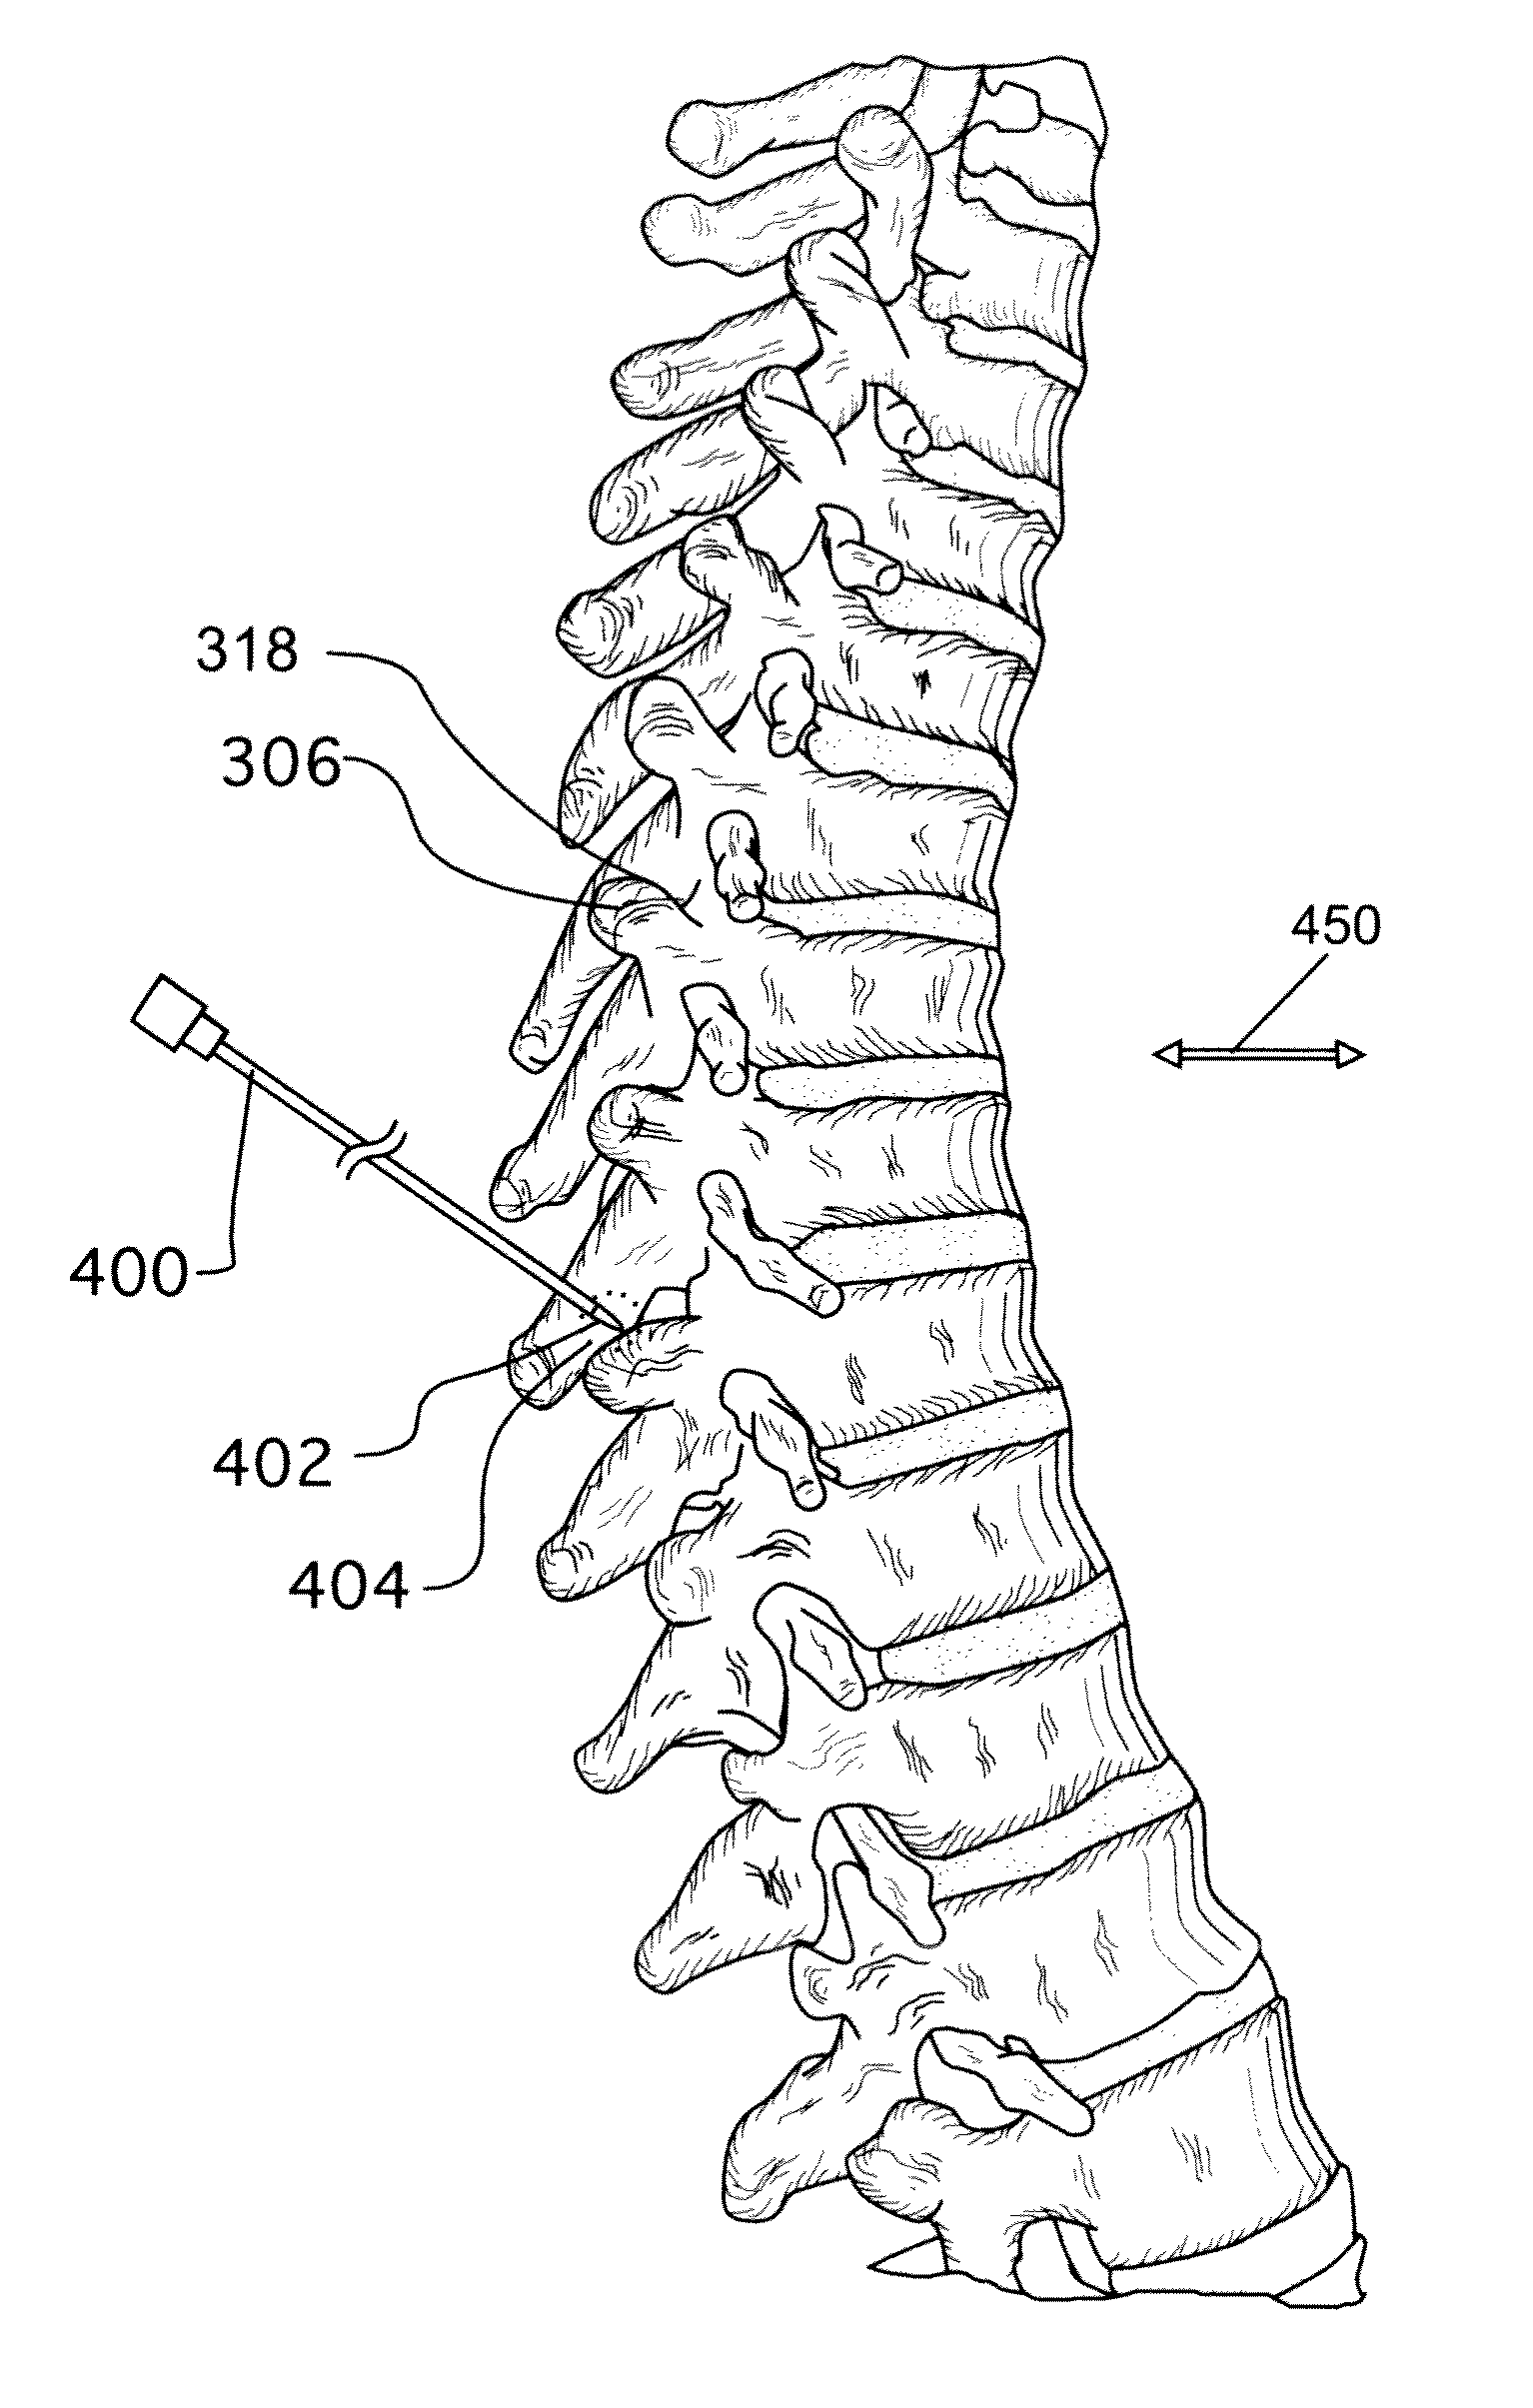 Methods for treating the thoracic region of a patient's body